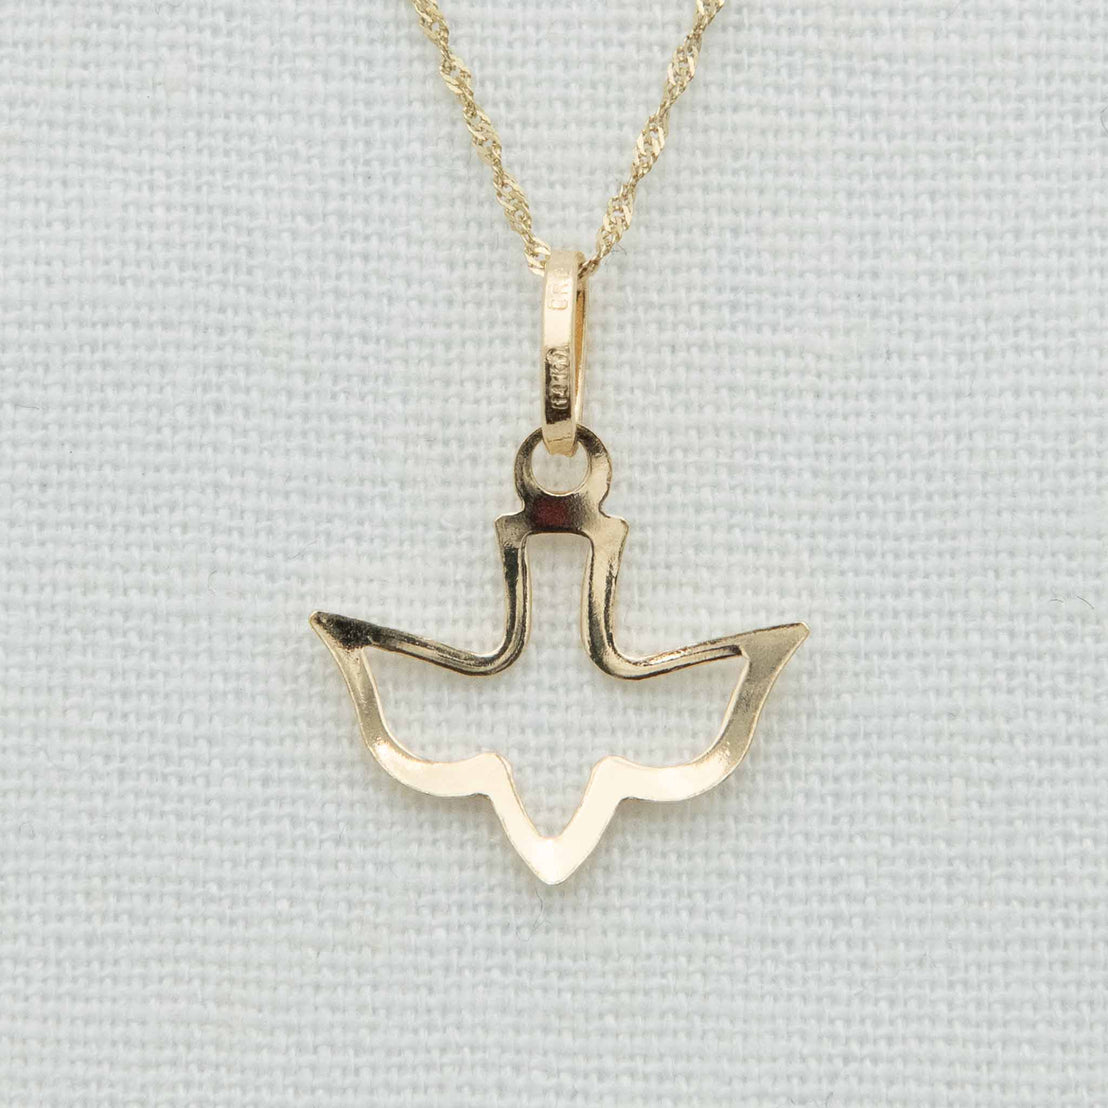 A 14k Gold Dove Charm with Chain featuring a pendant in the shape of an abstract dove. The solid gold pendant hangs from a twisted gold chain, making it the perfect accessory for a christening outfit. The background is a light, textured fabric.